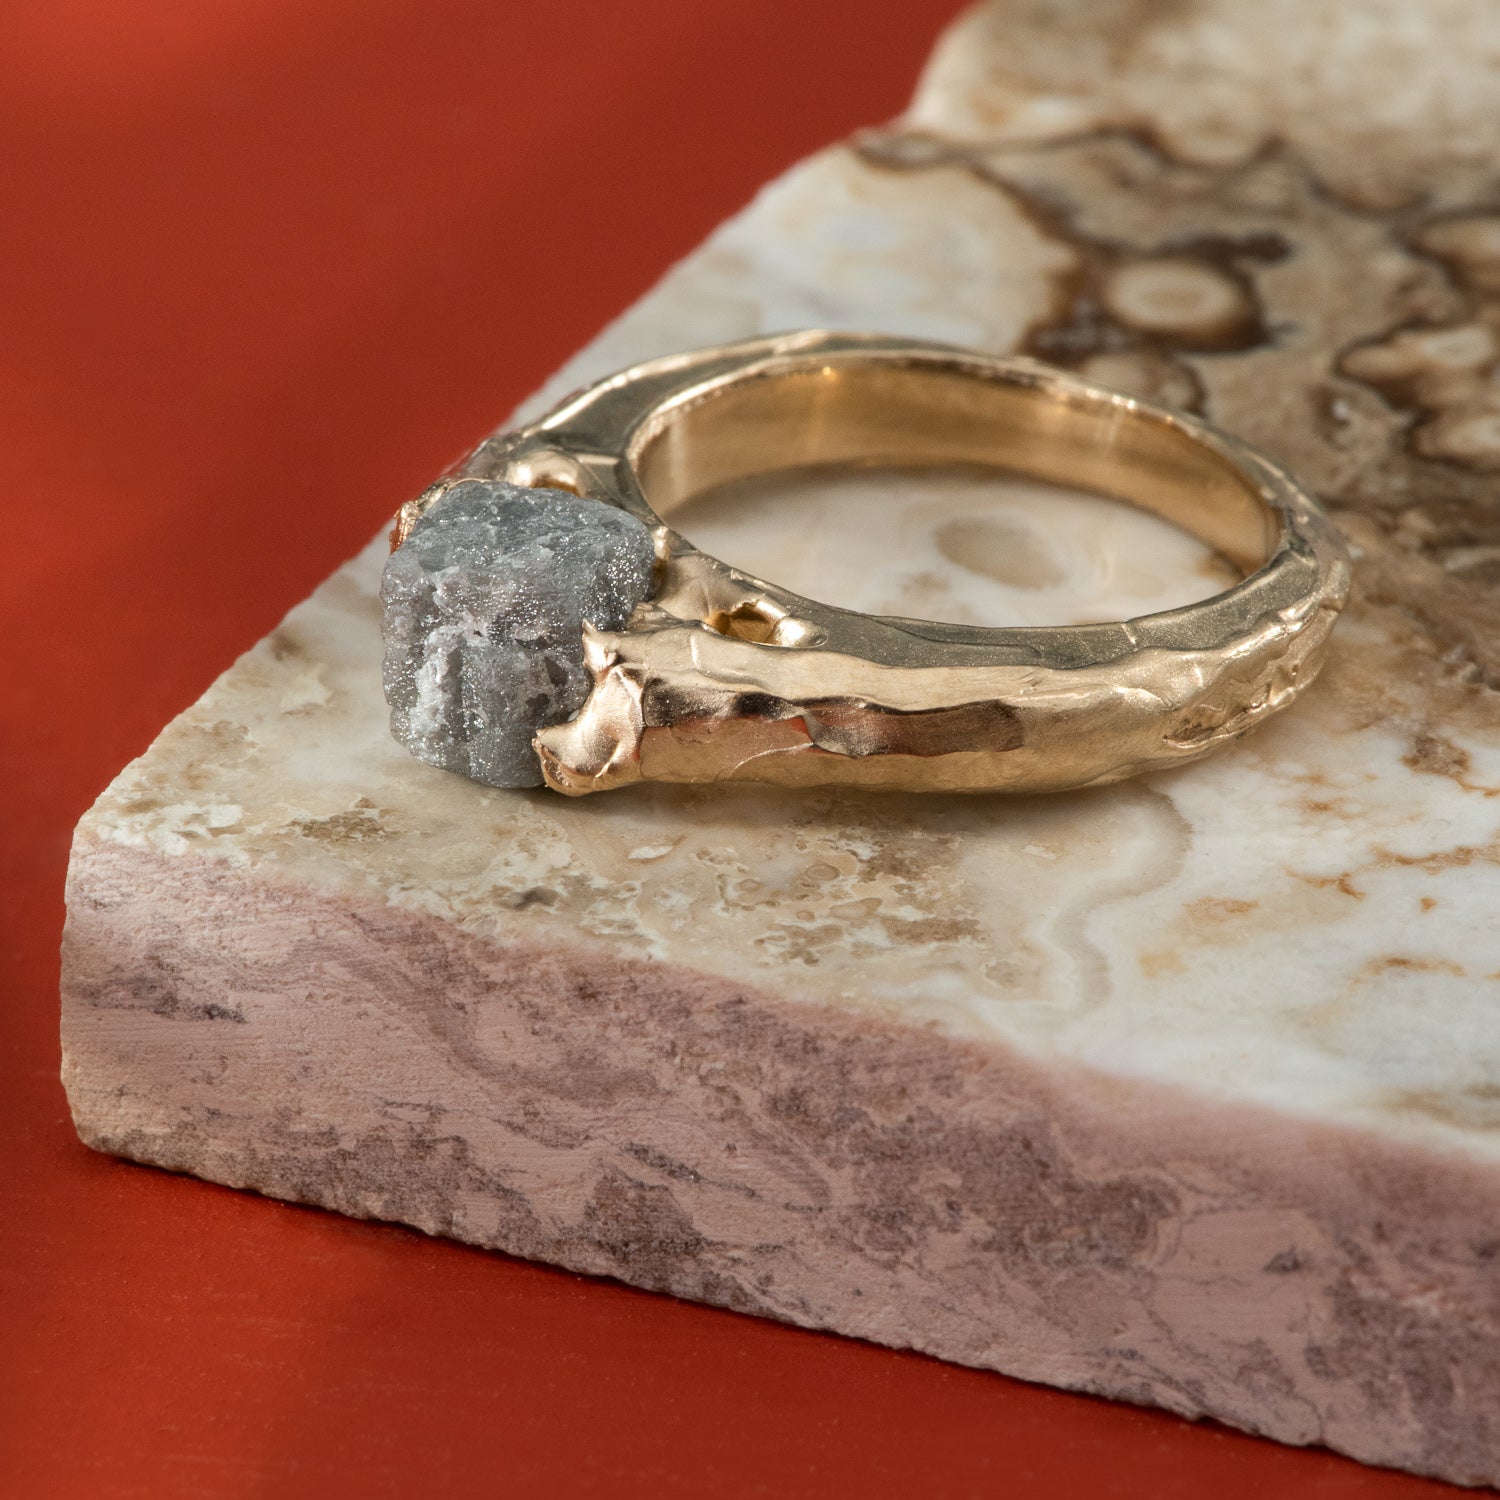 A rough, grey diamond set into a rustic and polished yellow gold band